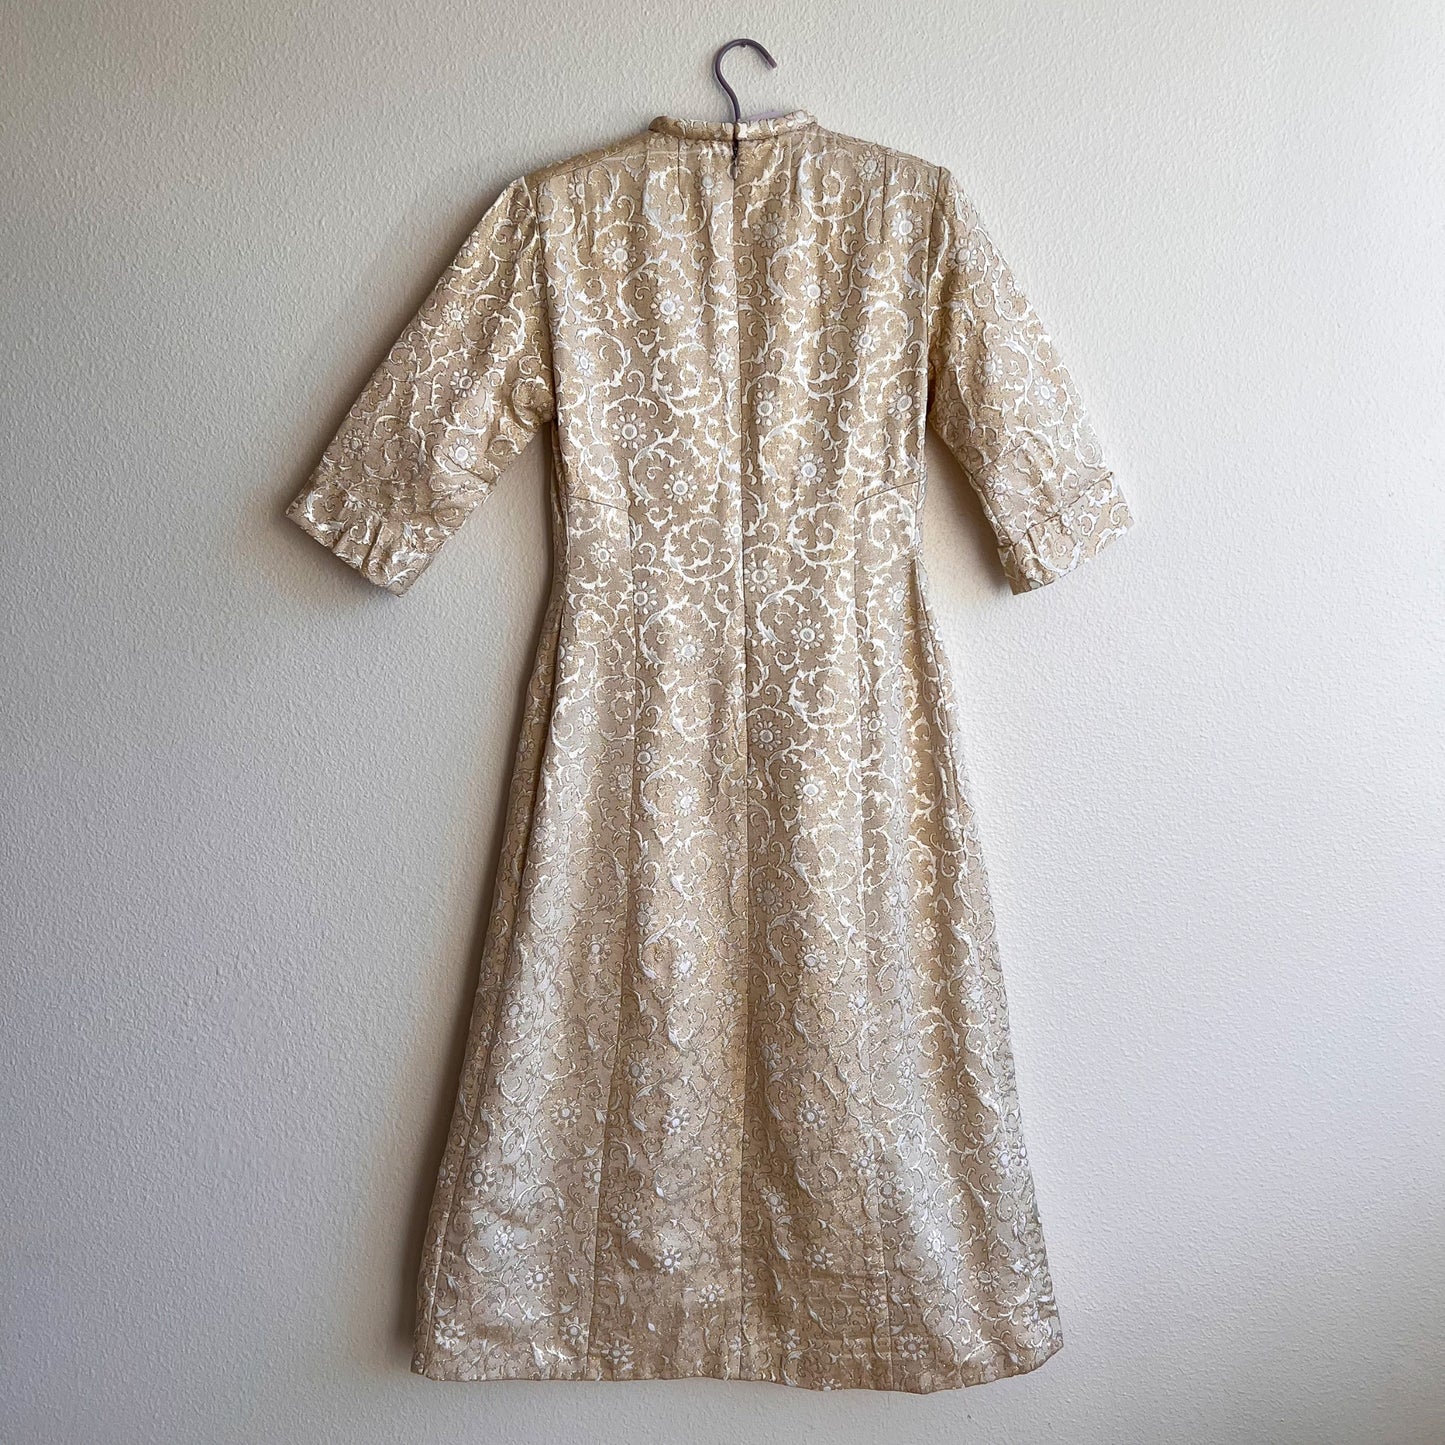 1960s White and Gold Floral Trapeze Dress (M)